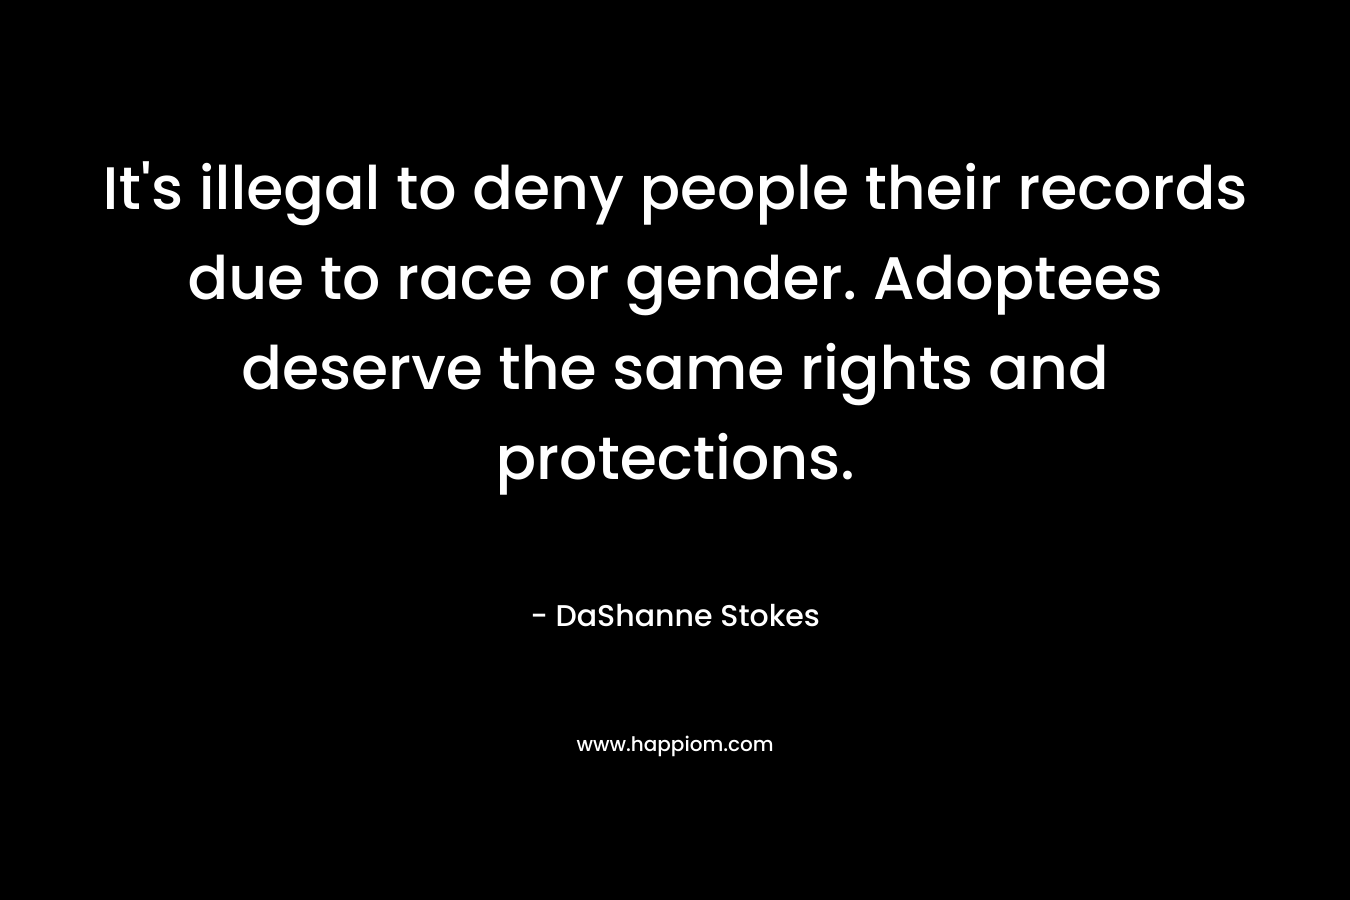 It's illegal to deny people their records due to race or gender. Adoptees deserve the same rights and protections.